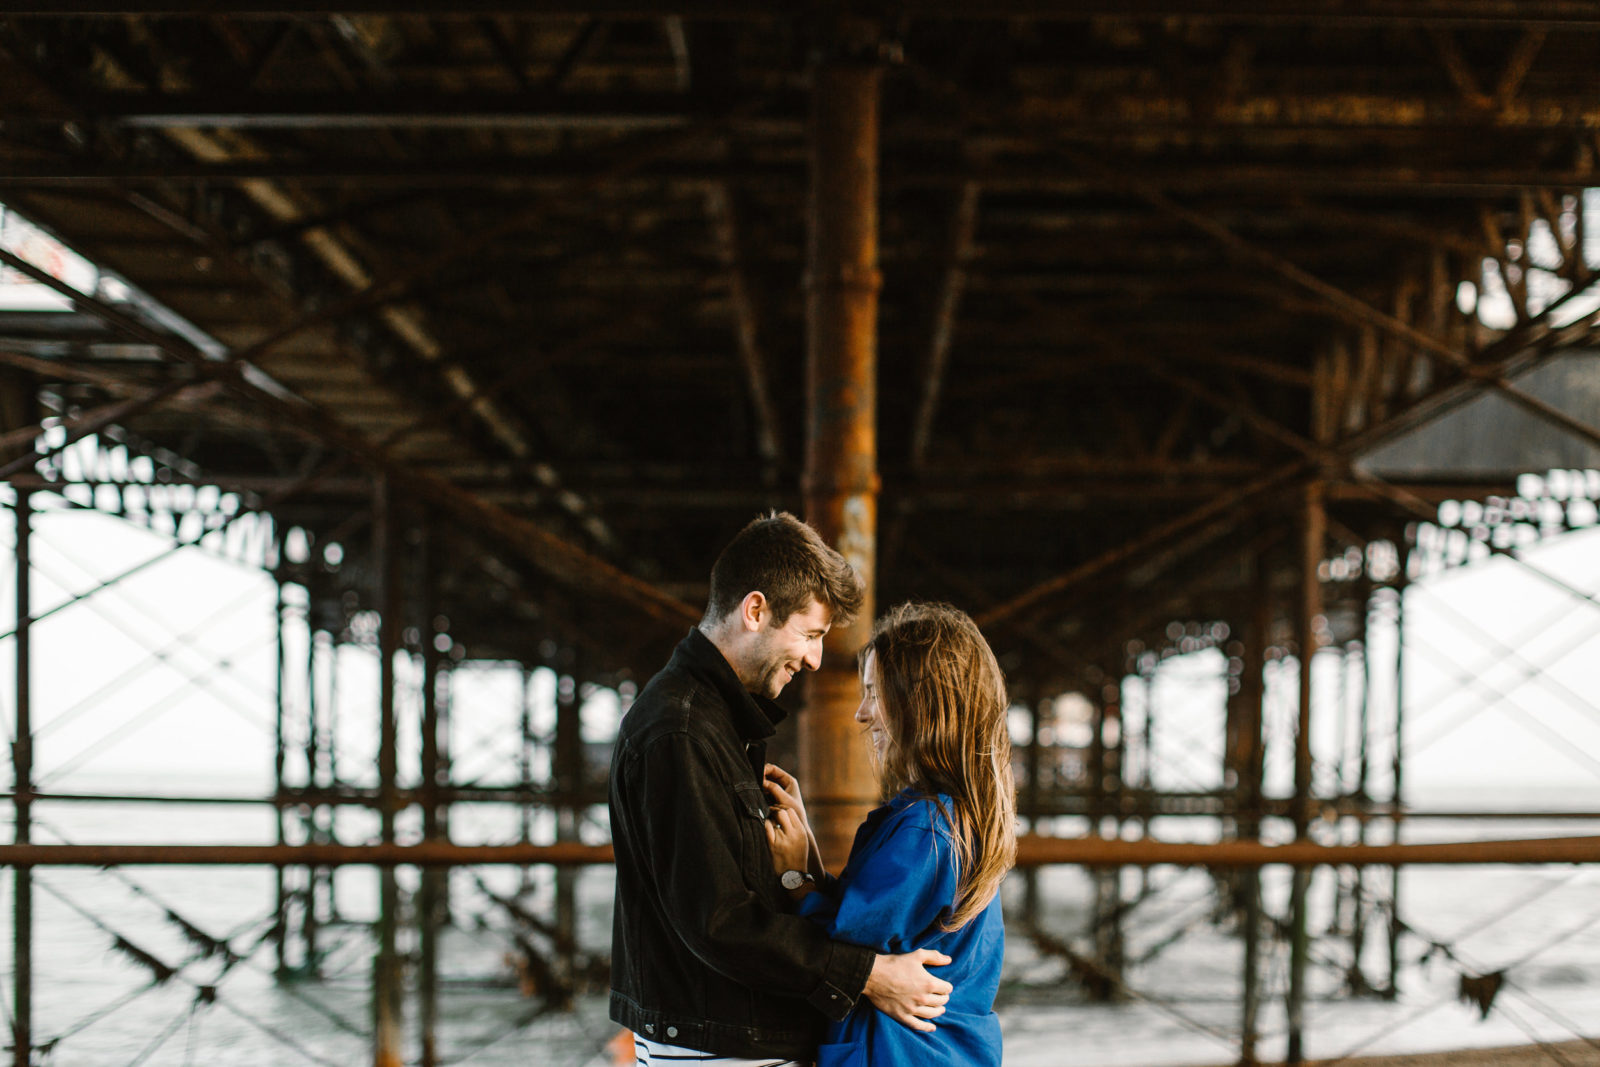 Engagement Session at the pier, and photography tips from Juan and Angie.